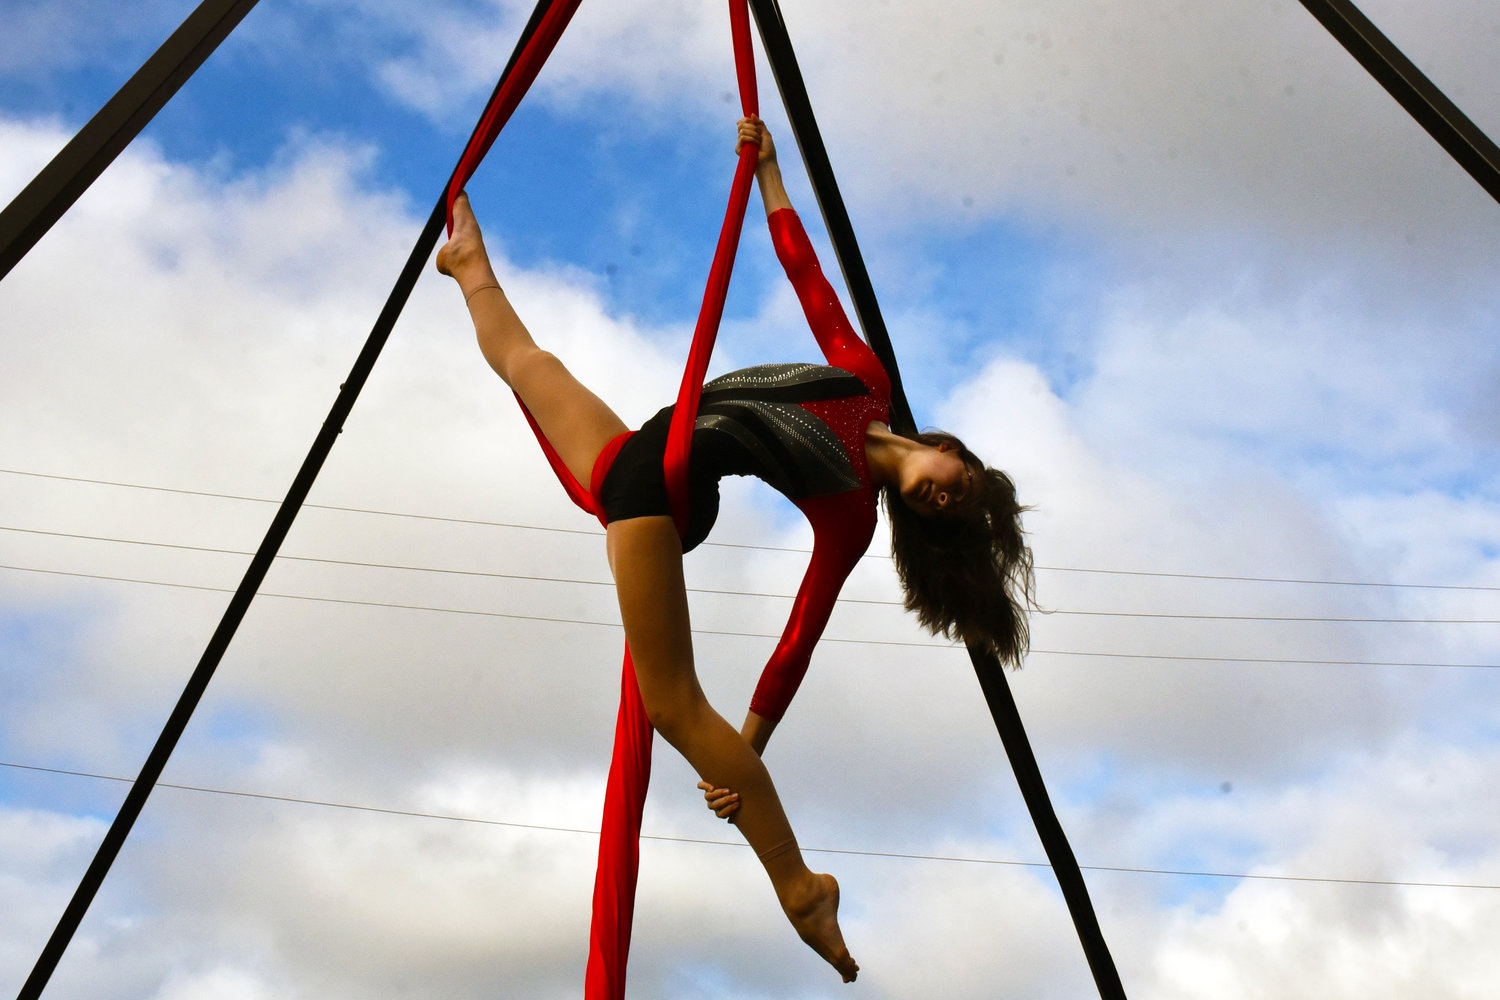 Bailey Sowers, 15, performs on the aerial silks.